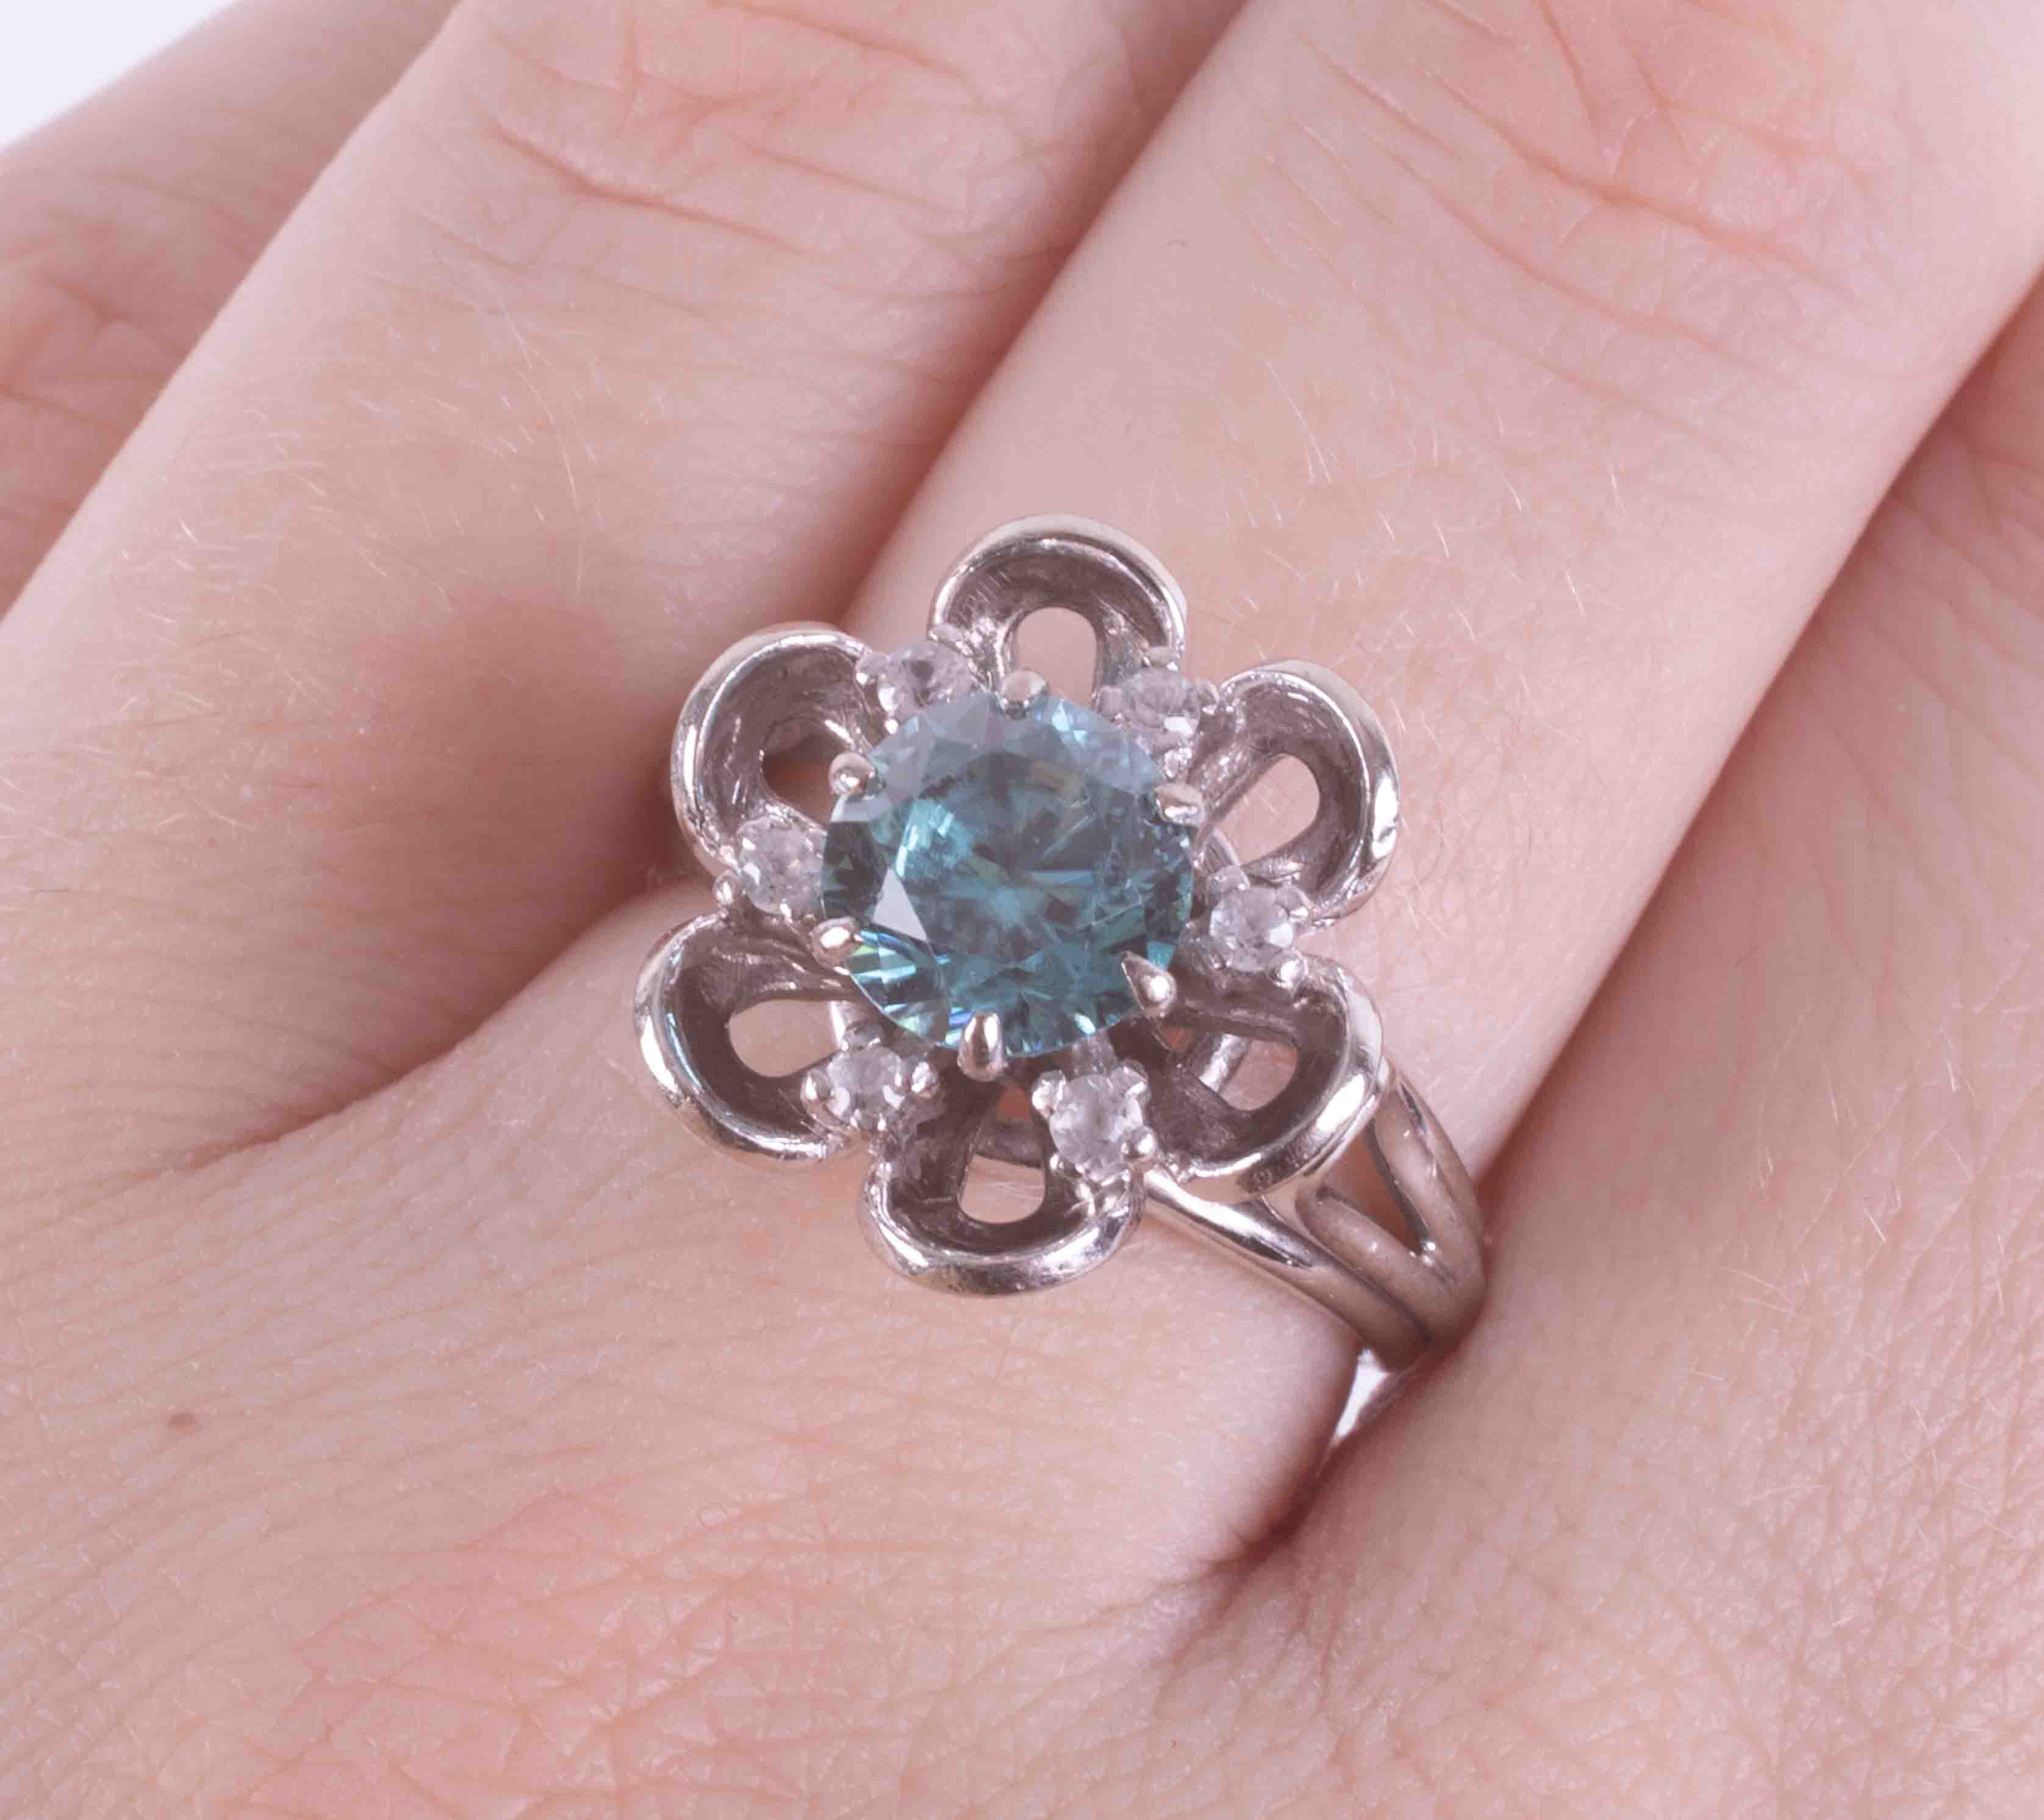 A 14ct white gold flower ring set with a central round cut blue zircon, approx. 1.47 carats, - Image 2 of 2